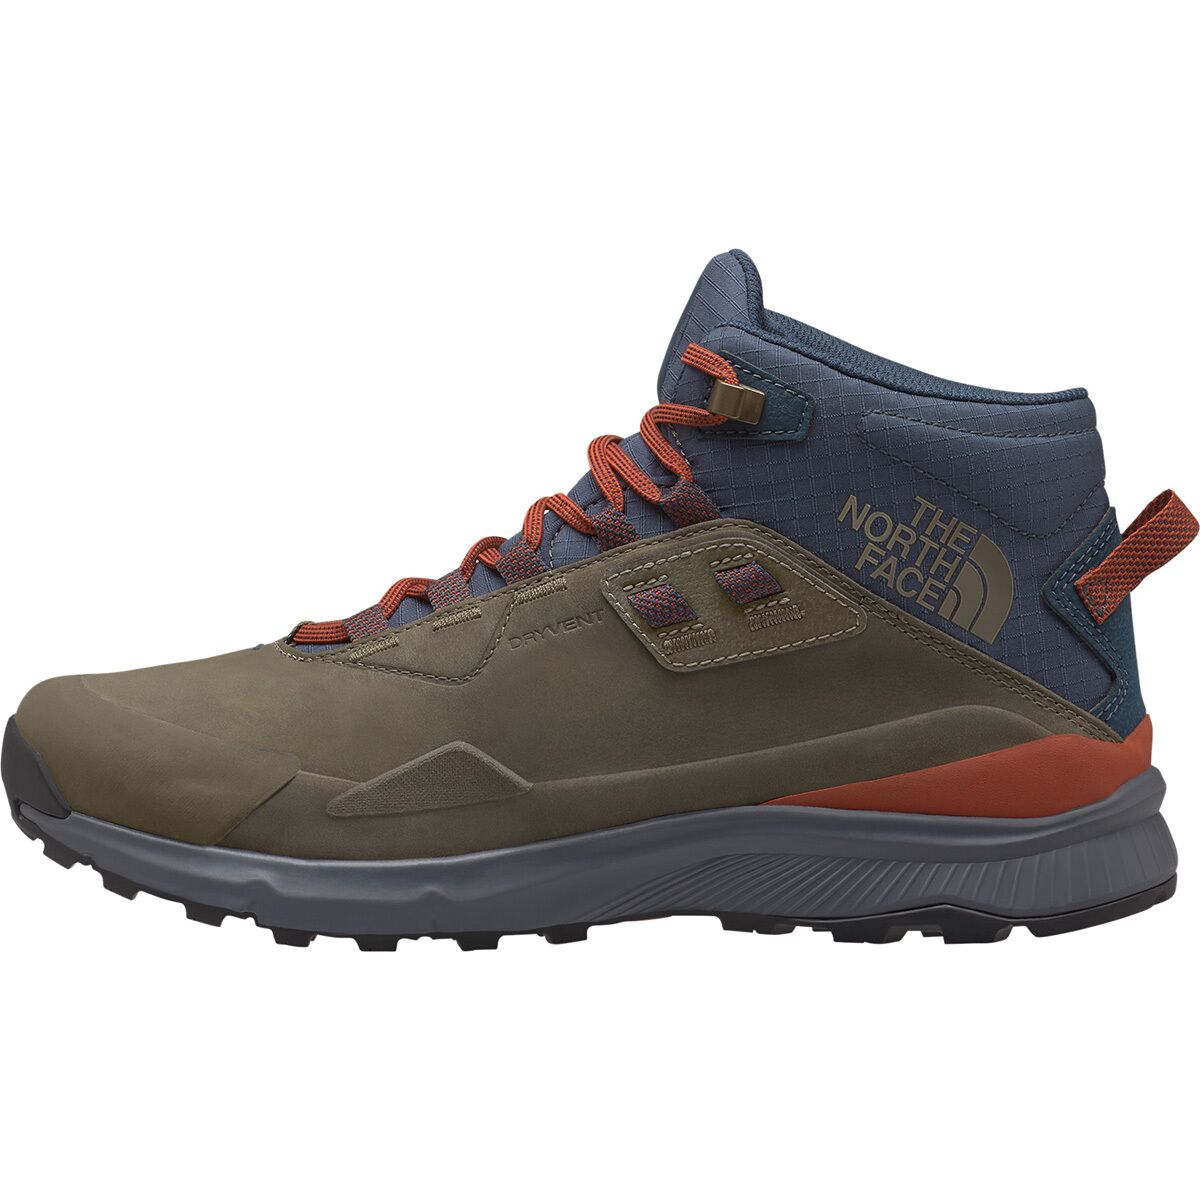 The North Face Cragstone Leather Mid WP Hiking Shoe - Men's